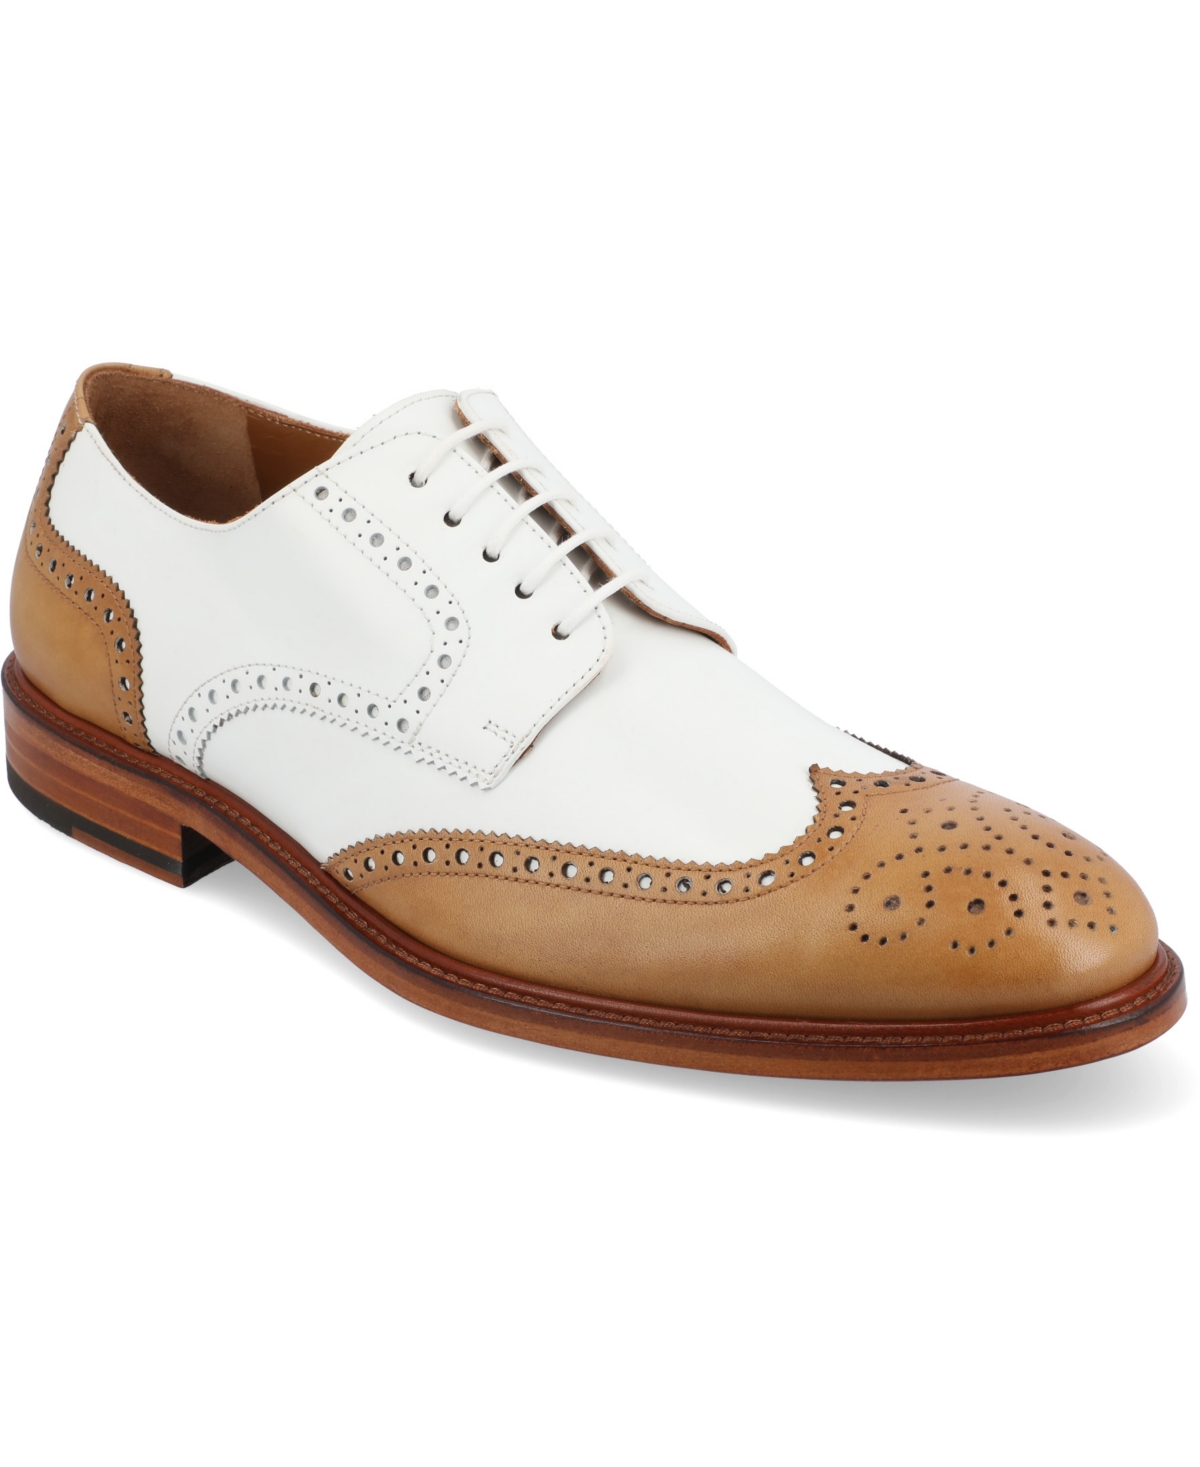 Men's Spectator Handcrafted Leather Brogue Wingtip Oxford Lace-up Dress Shoe - Honey